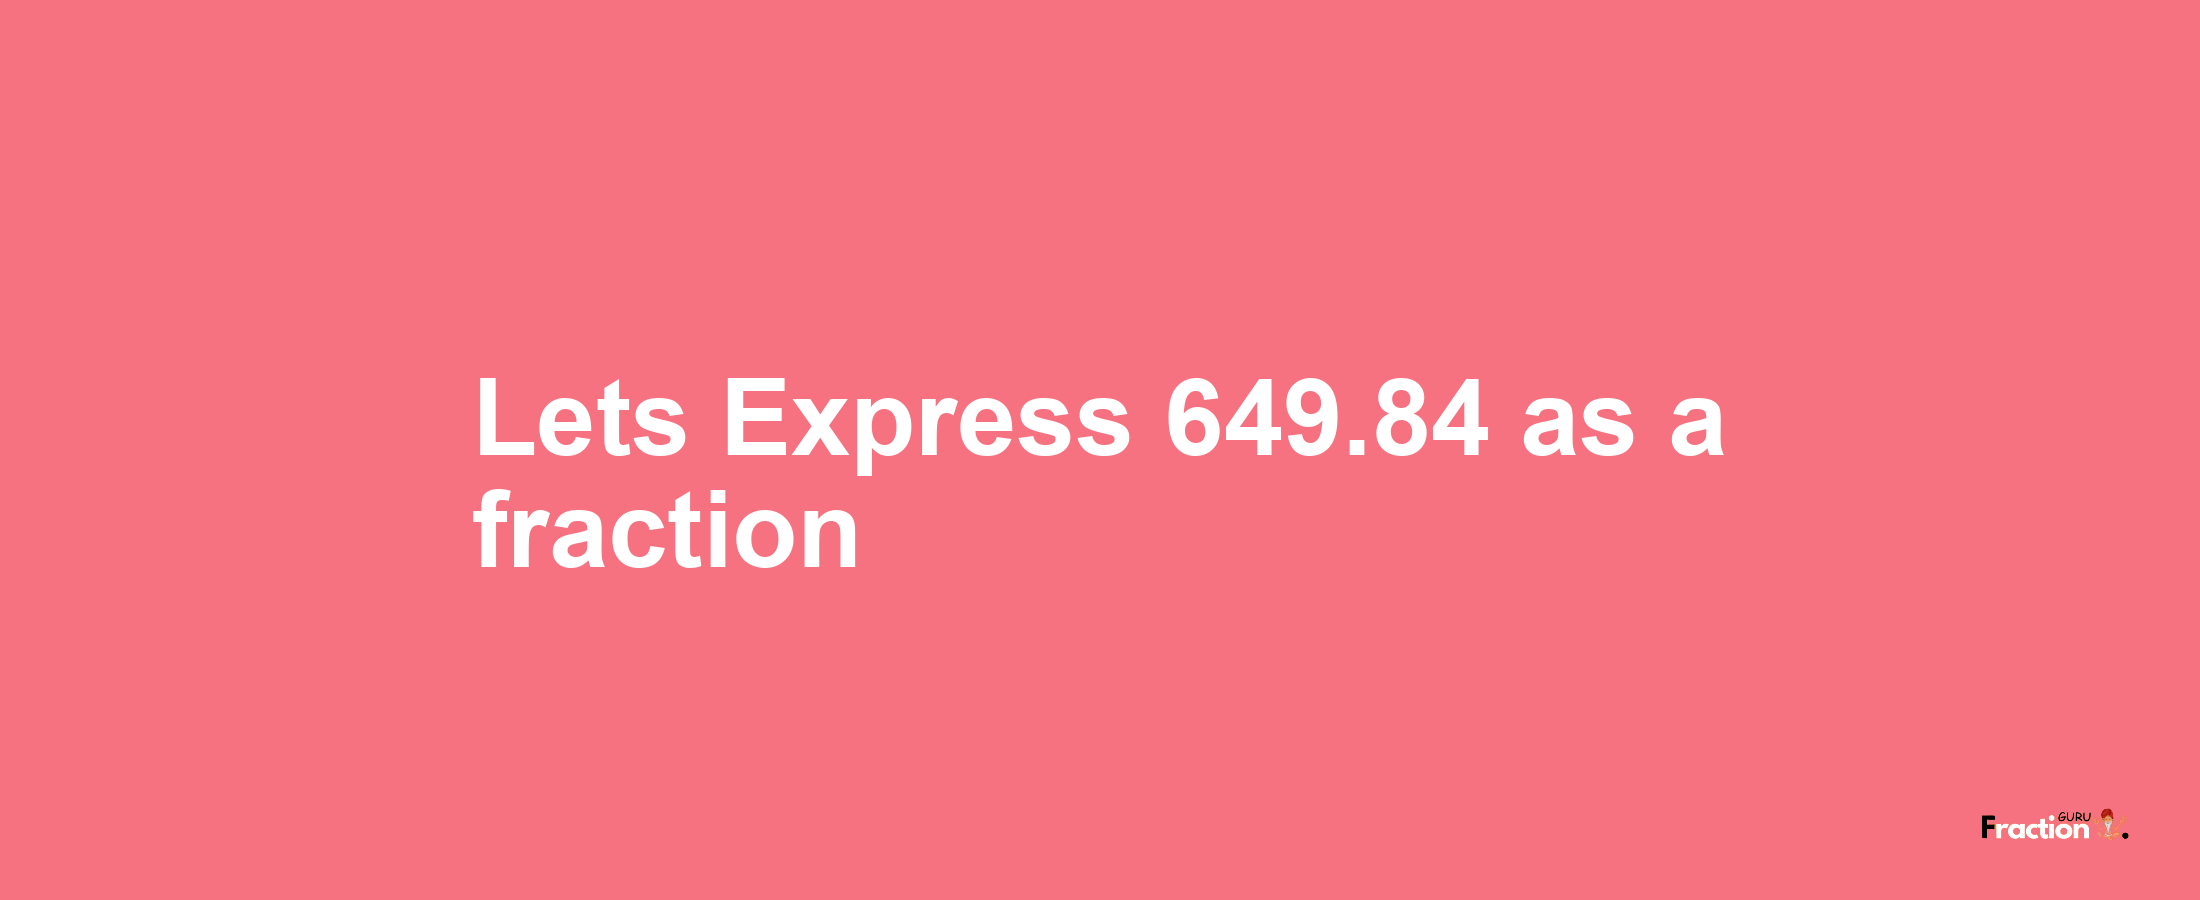 Lets Express 649.84 as afraction